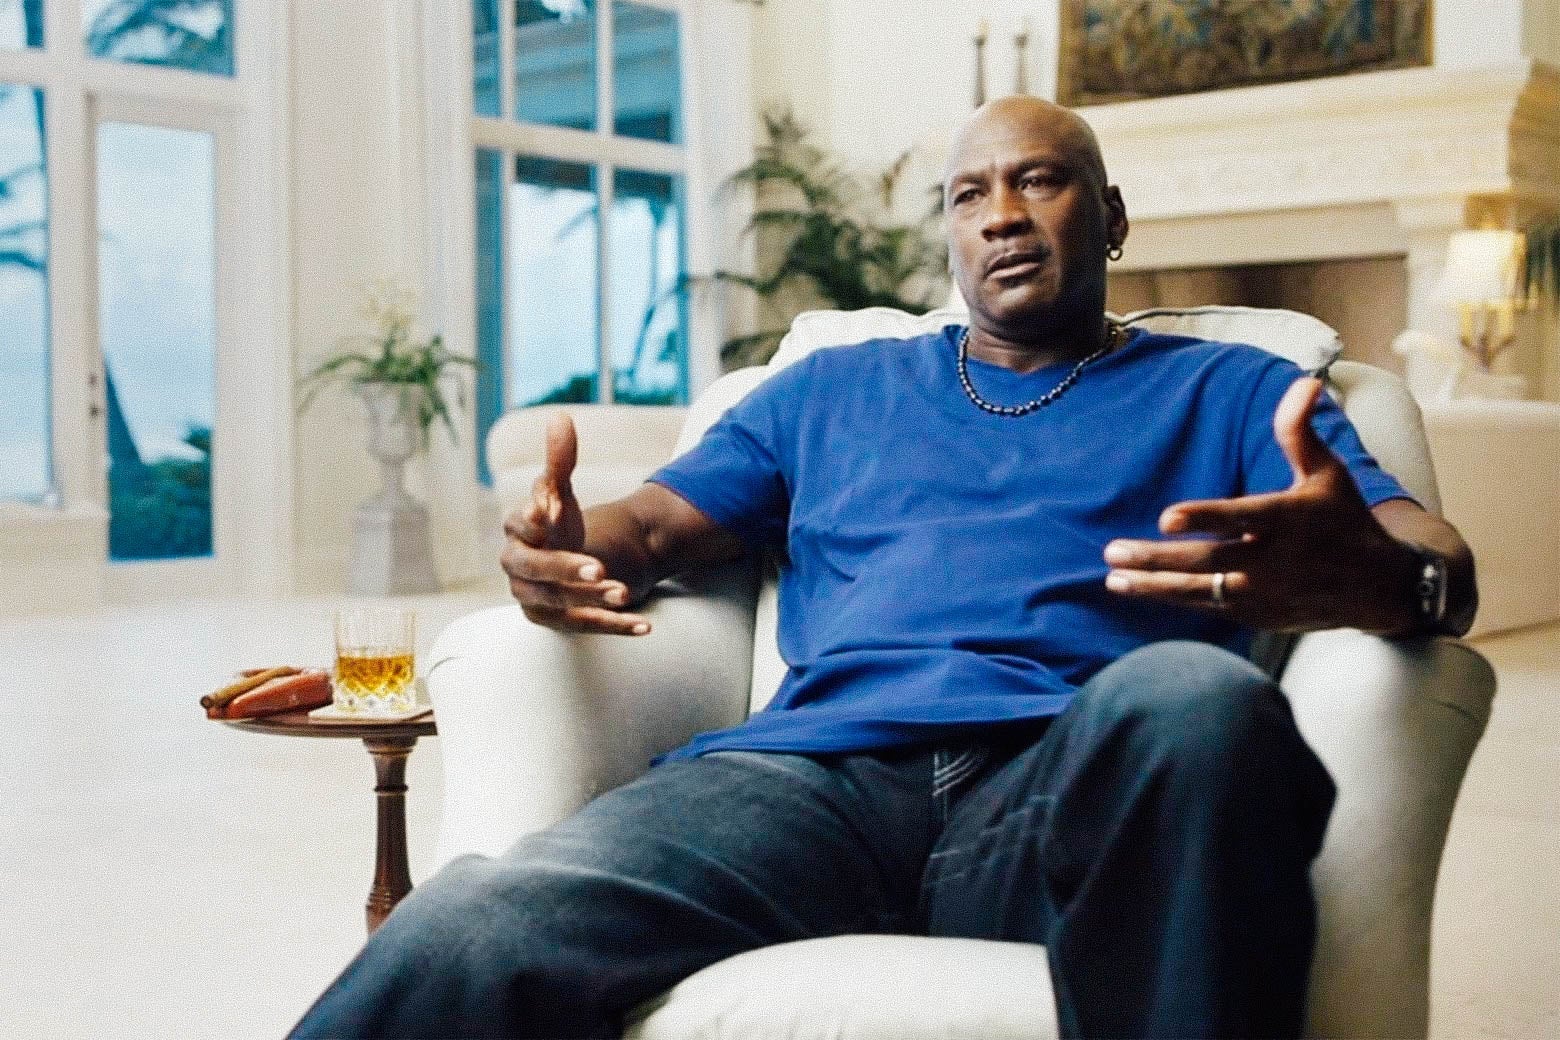 Michael Jordan sits in a chair and gesticulates.